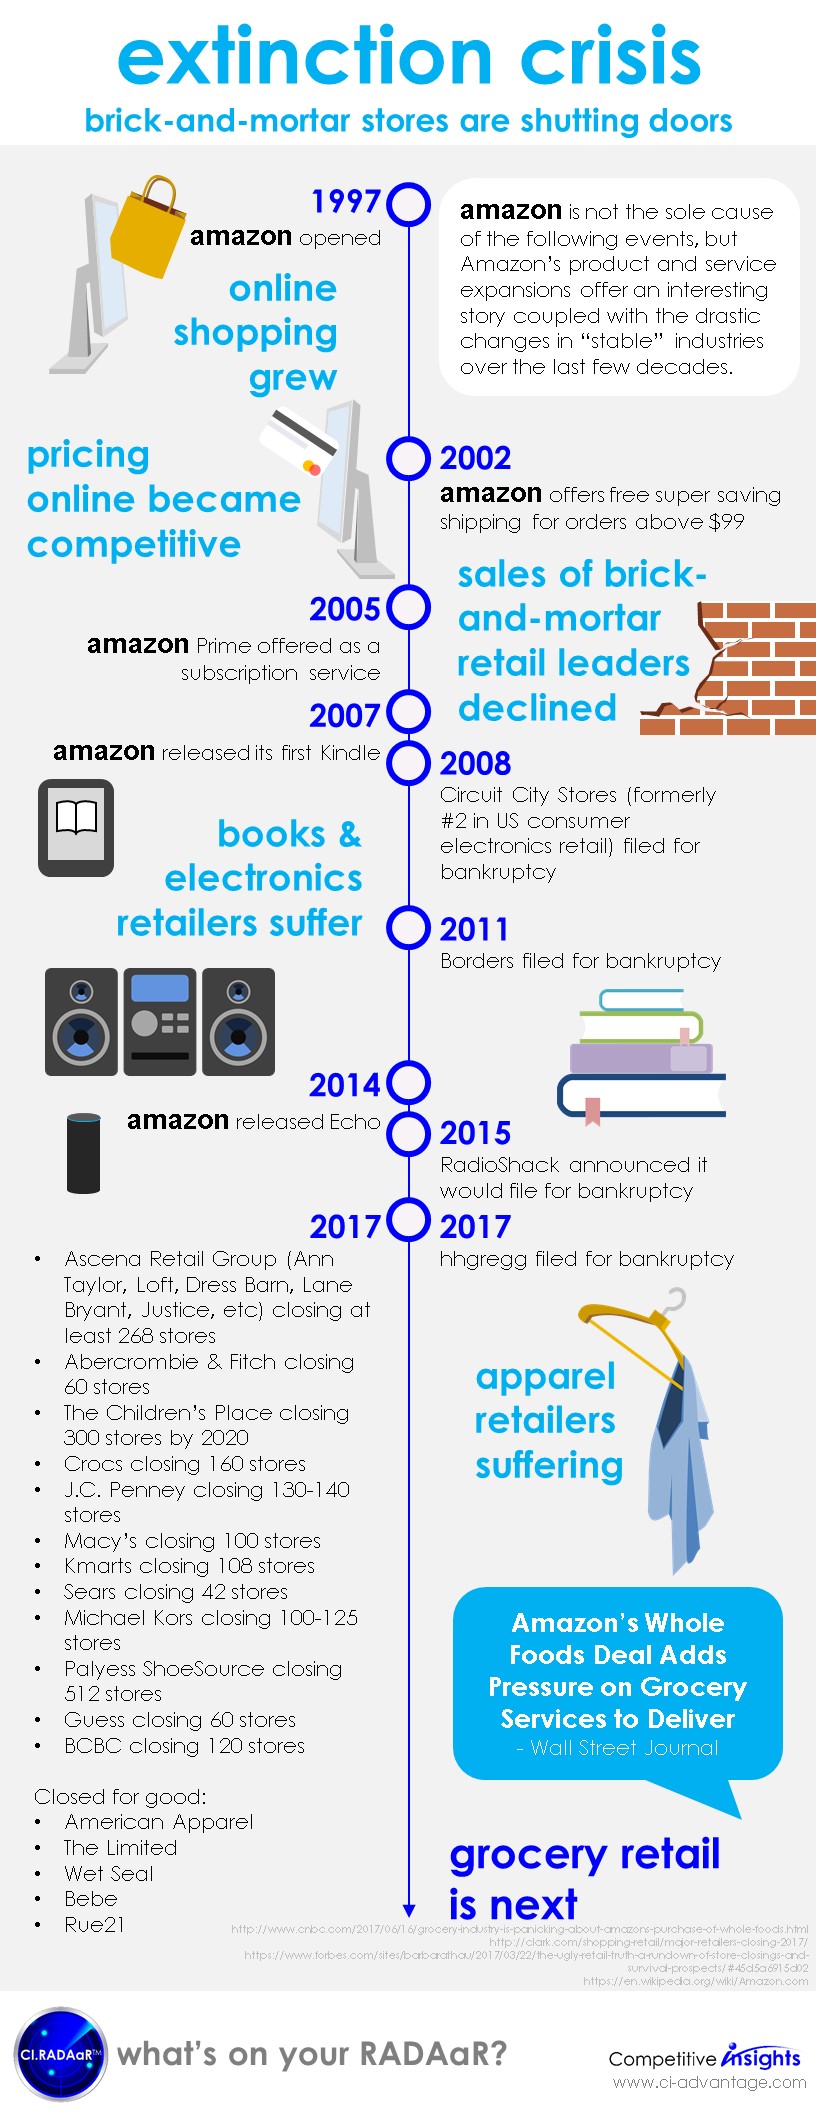 Competitive Insights infographic: brick-and-mortar stores extinction crisis